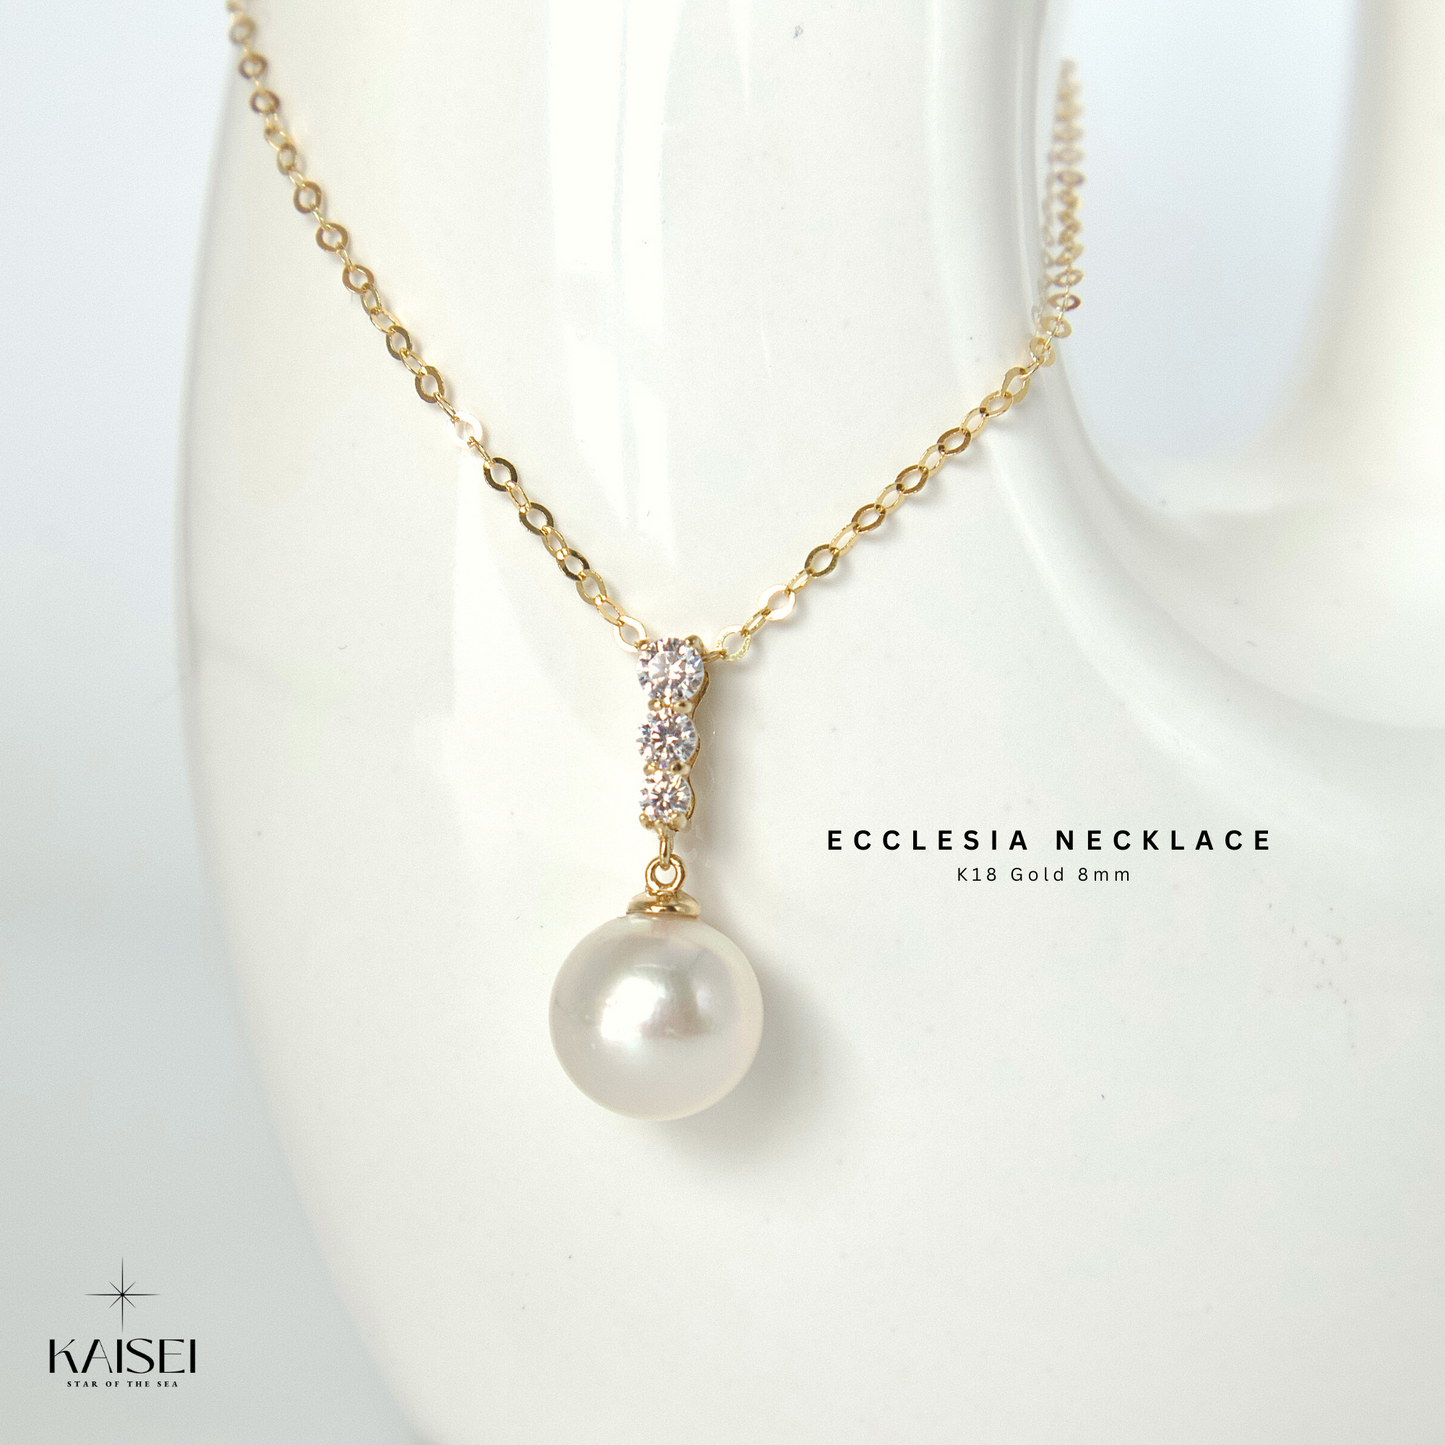 Kaisei Pearl - Ecclesia Necklace K18 Gold Japanese Akoya Pearl 8mm Luxury Jewelry